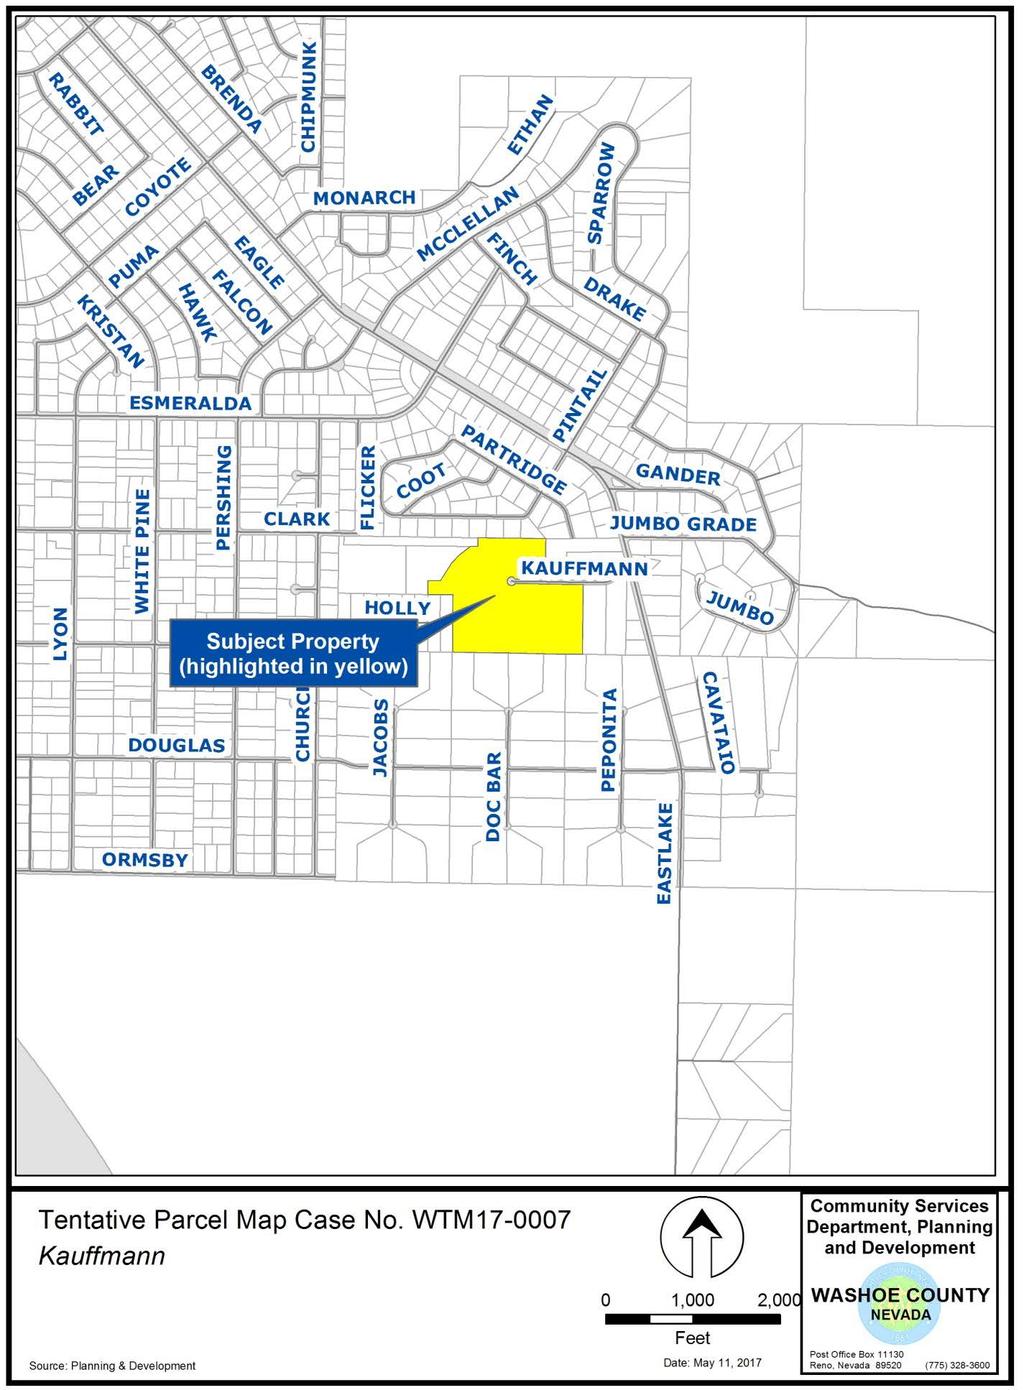 Washoe County Parcel Map Review Committee Staff Report Date: May